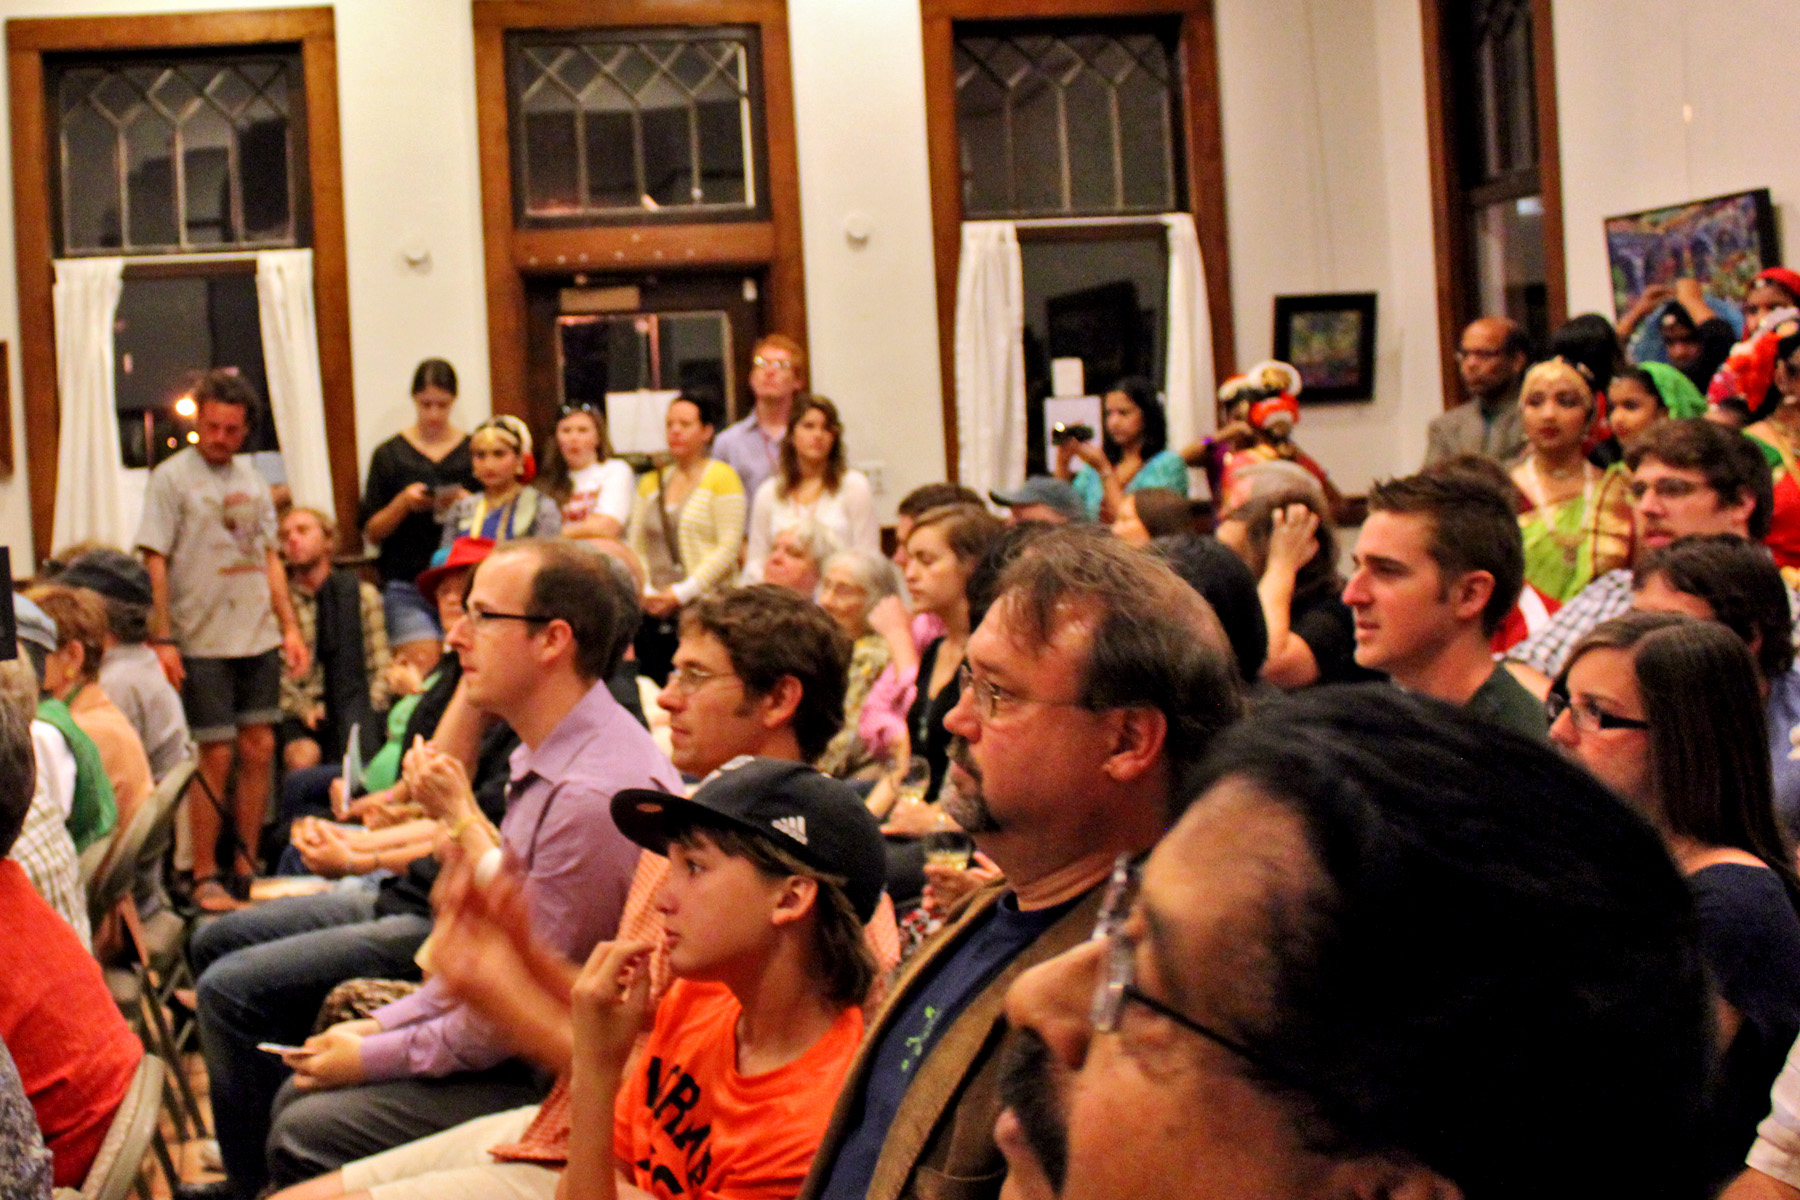 A packed house at the Neustadt Festival Opening Night. Photo by Jen Rickard.